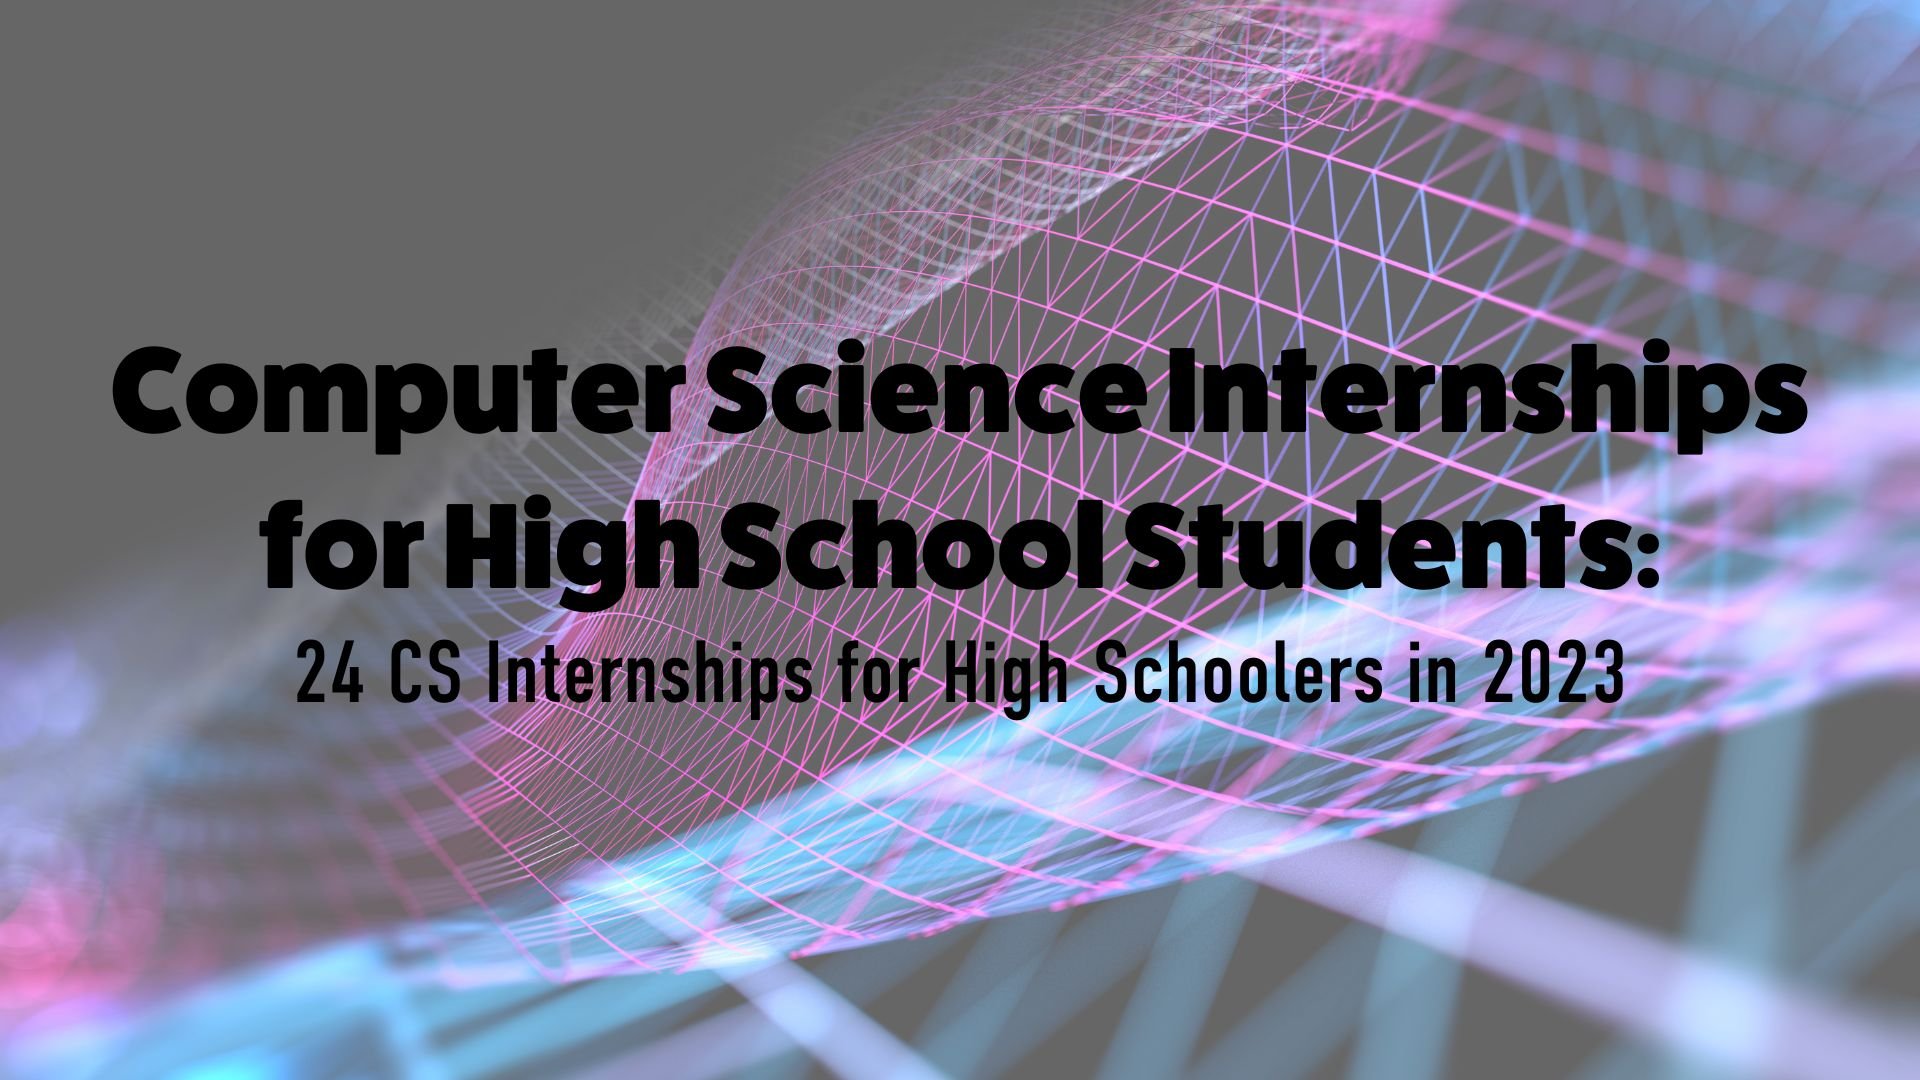 24 Computer Science Internships for High School Students in 2023